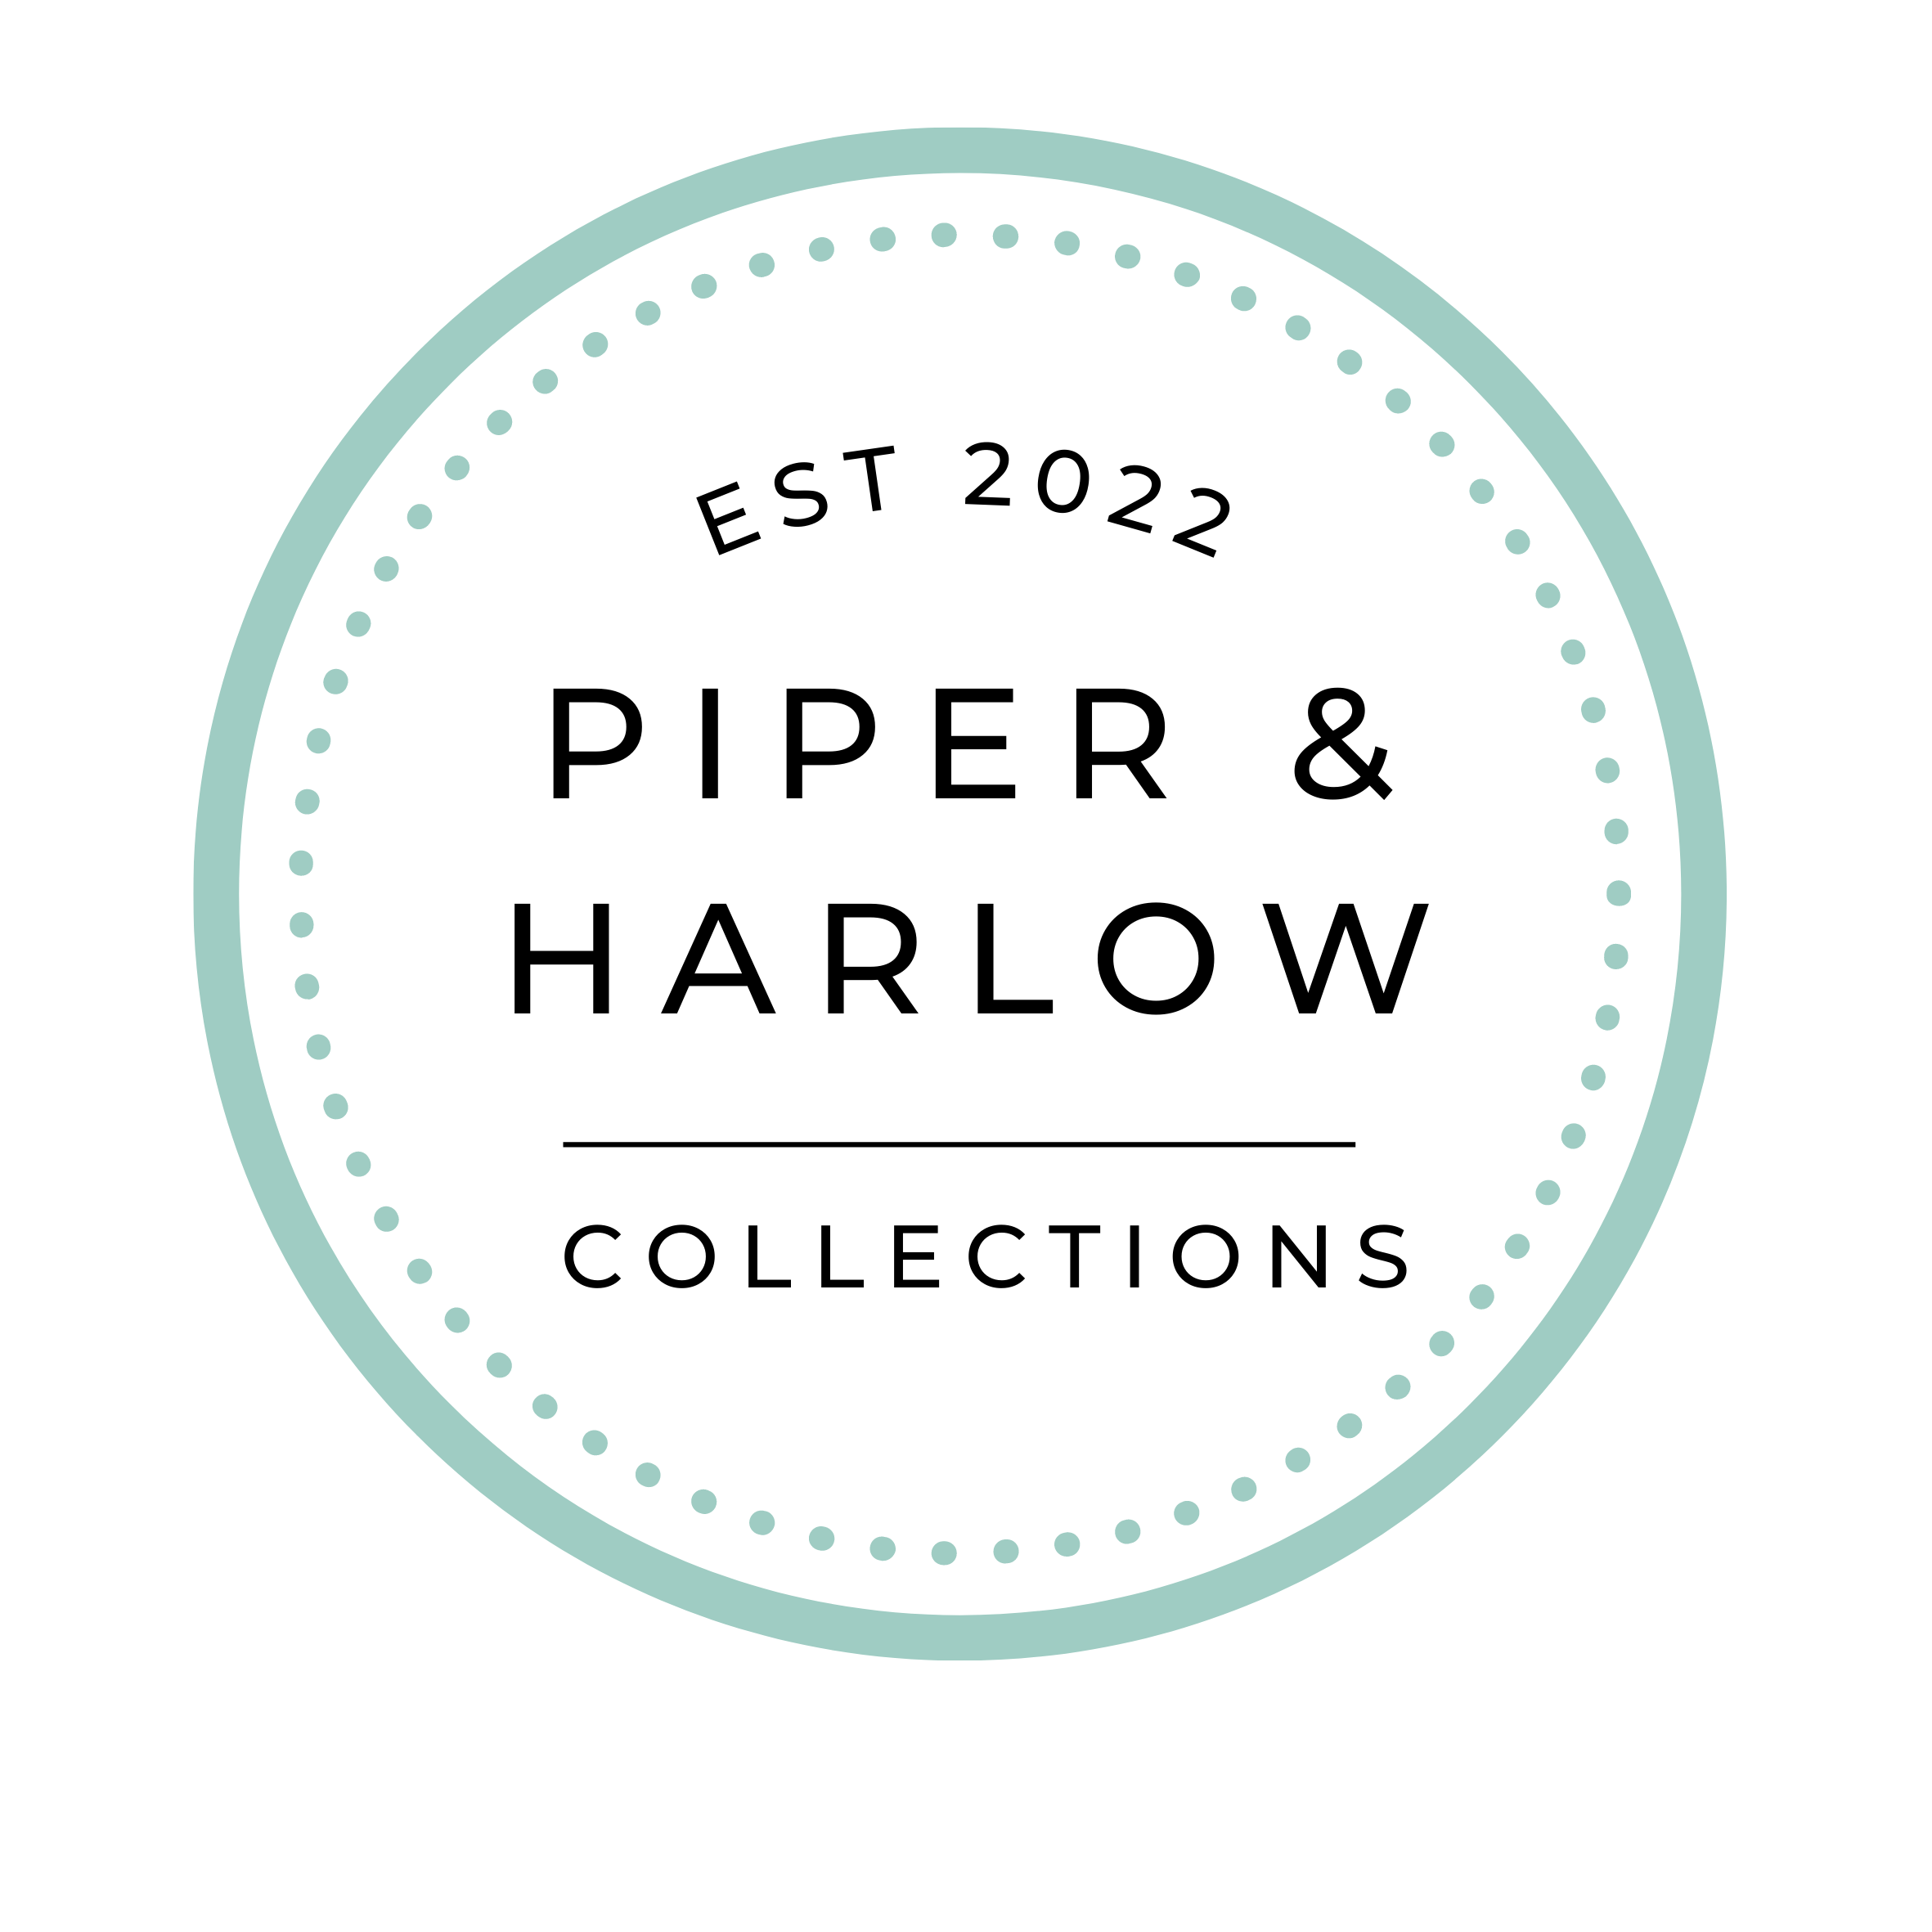 Piper & Harlow Collections